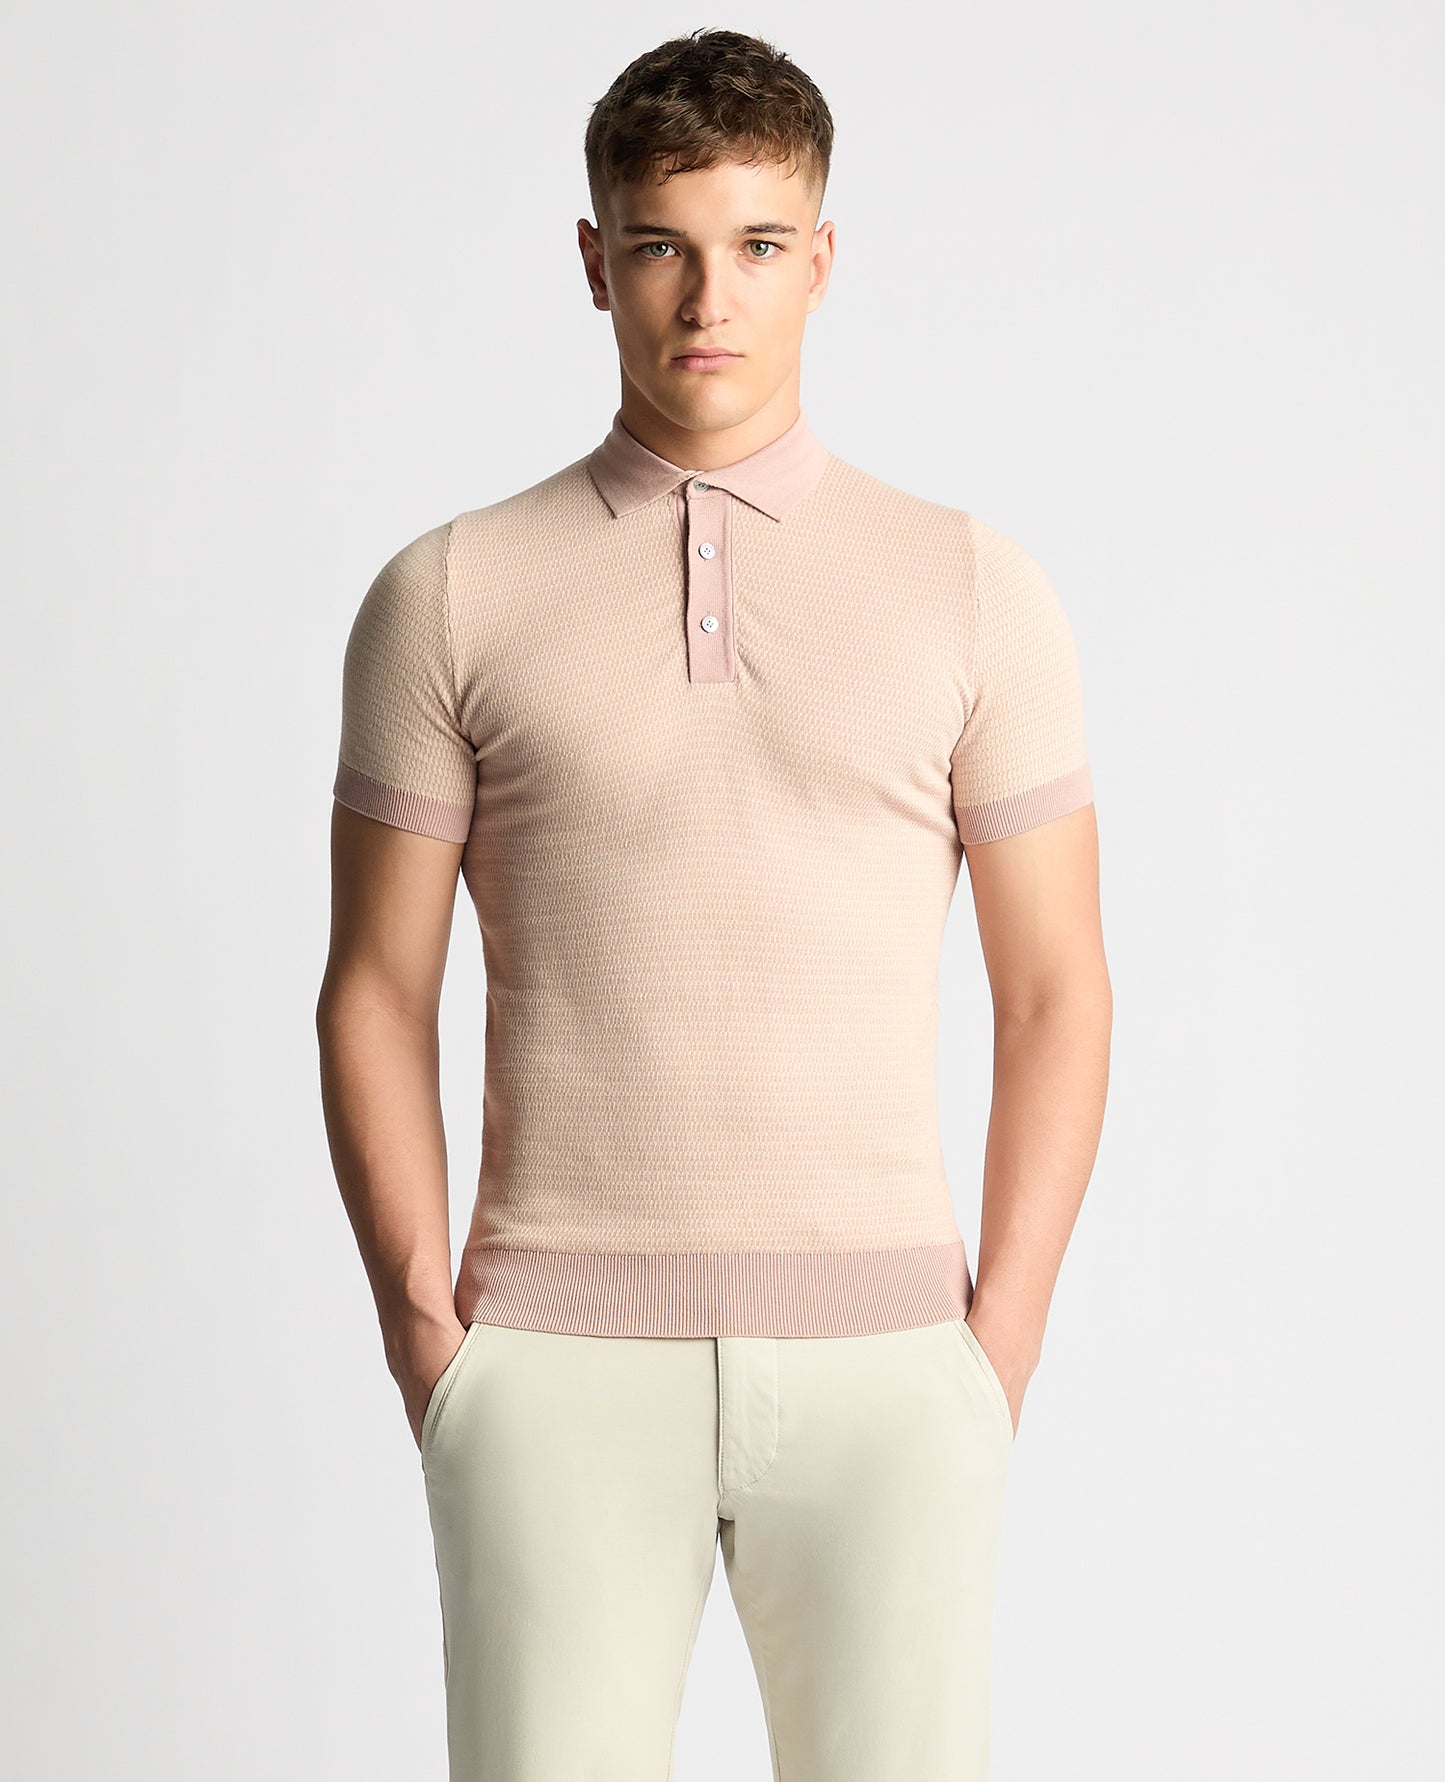 Remus Uomo Short Sleeve Knitted Polo Shirt - Pink